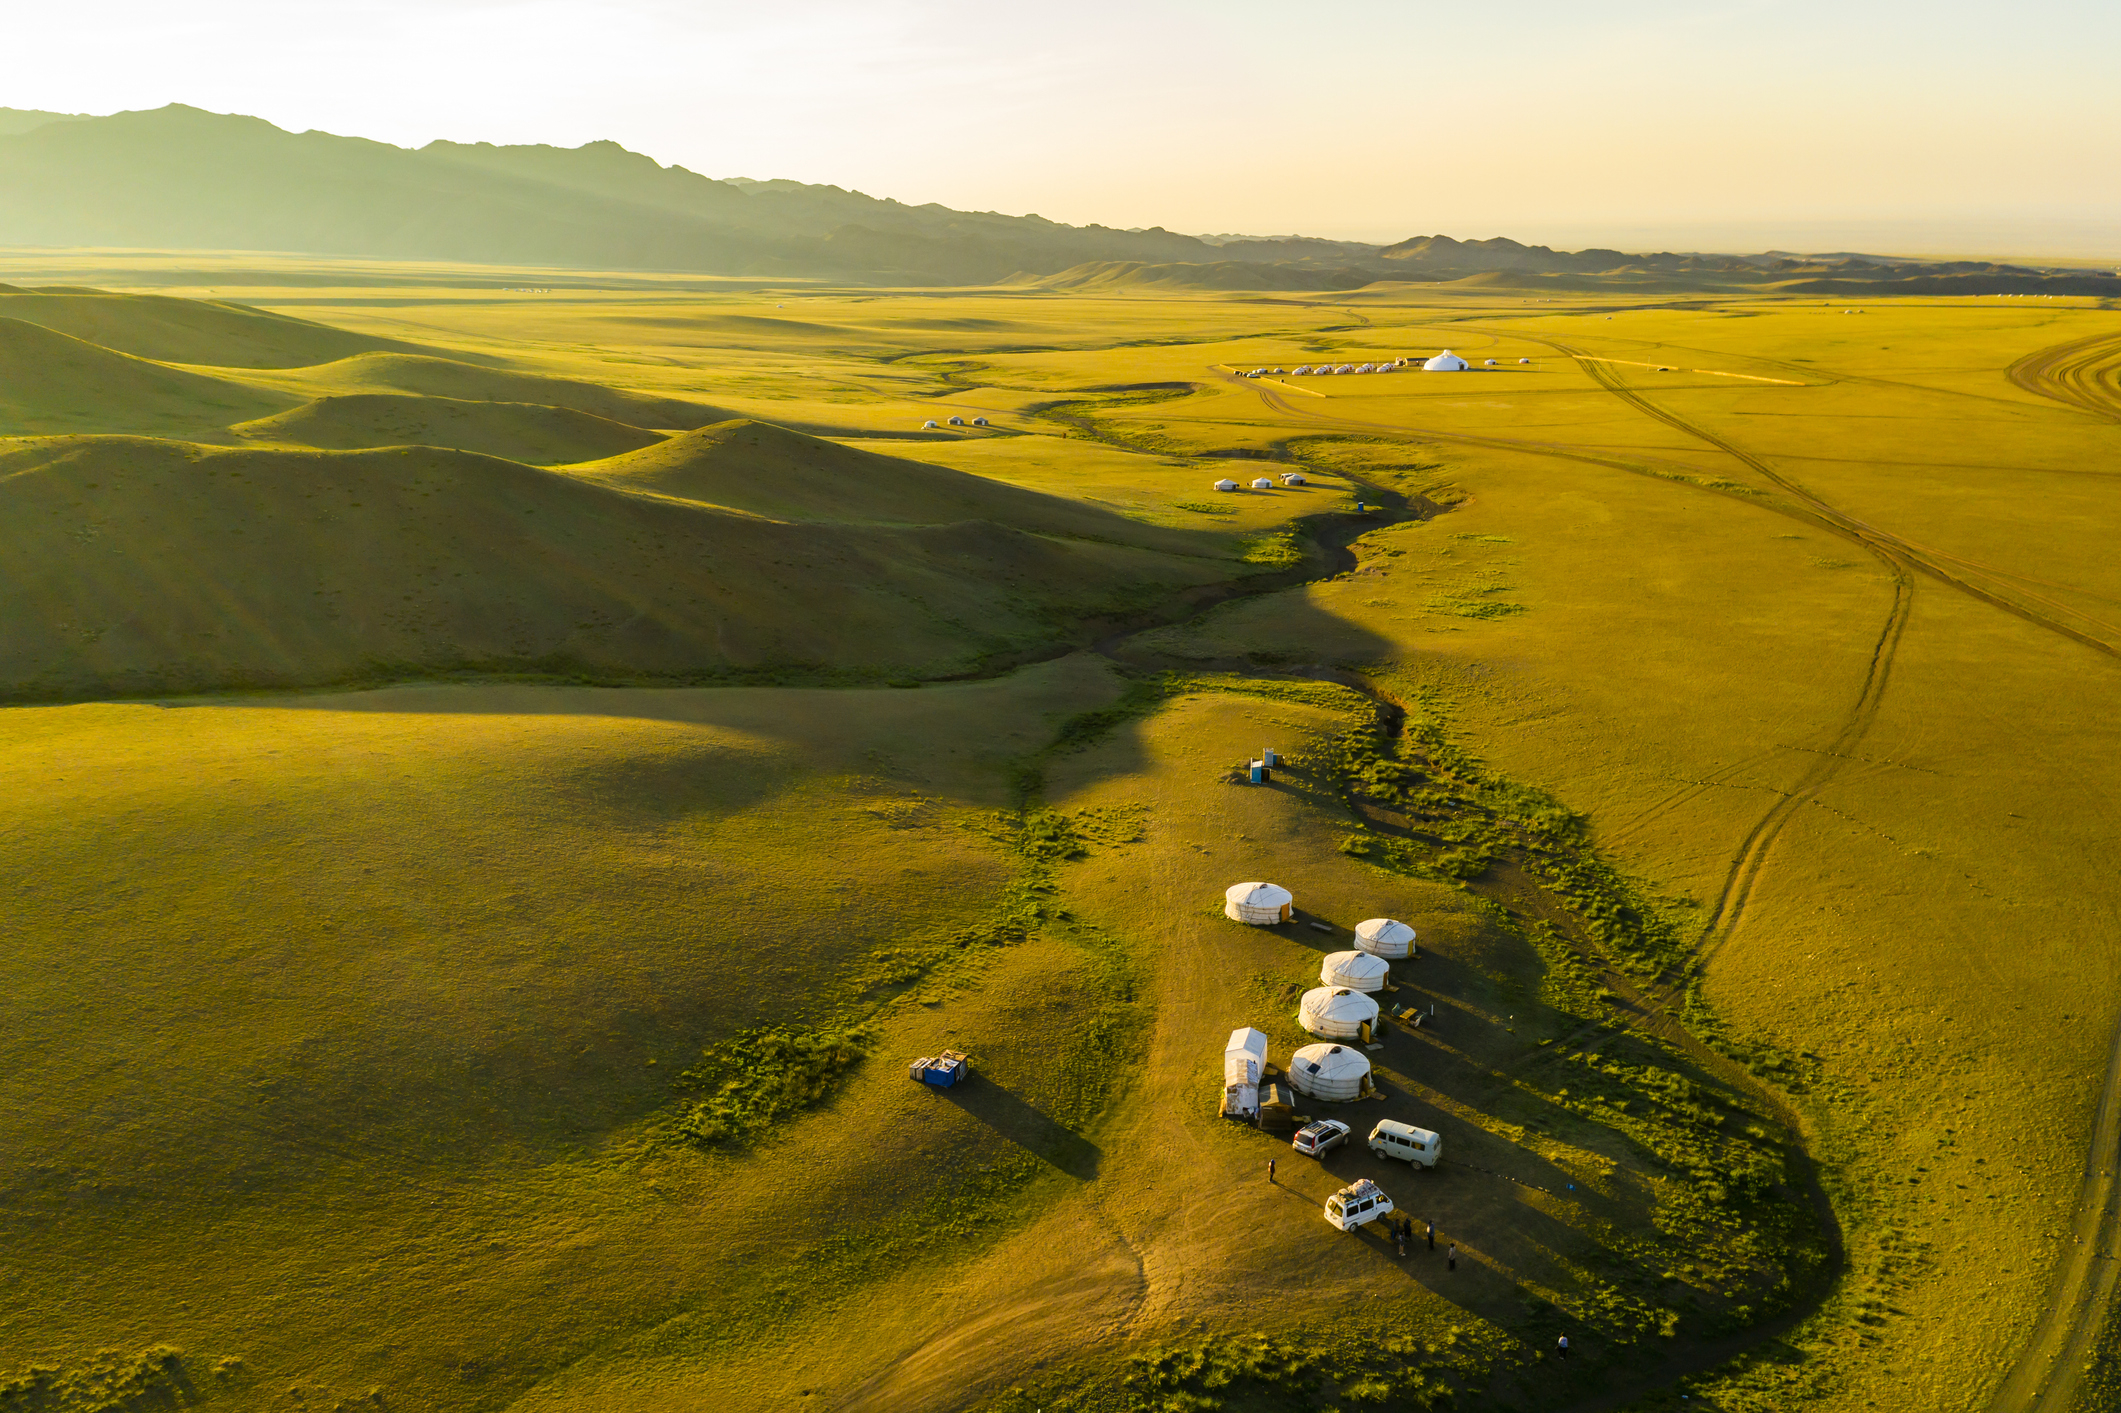 Aerial view of a cluster of traditional yurts in a vast grassy landscape at dawn or dusk